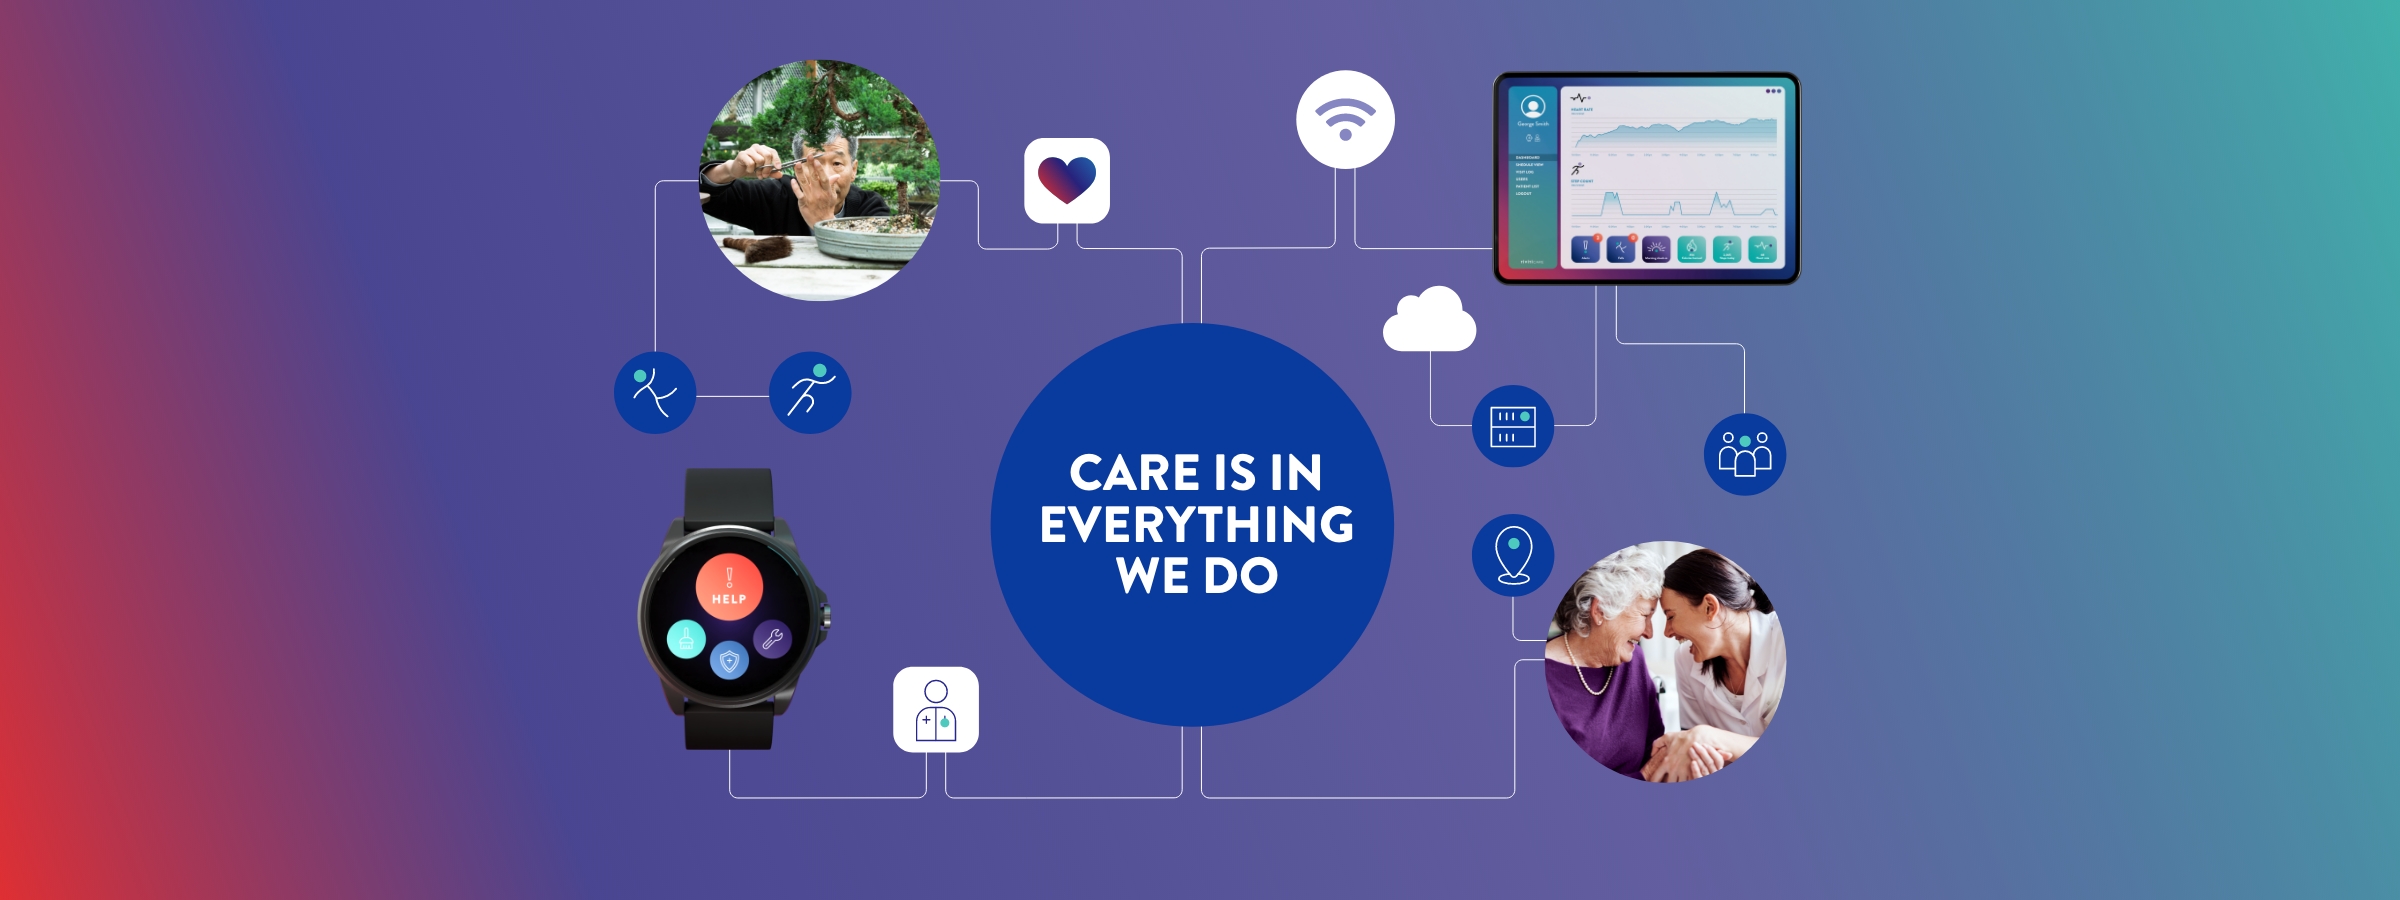 Care is in everything we do